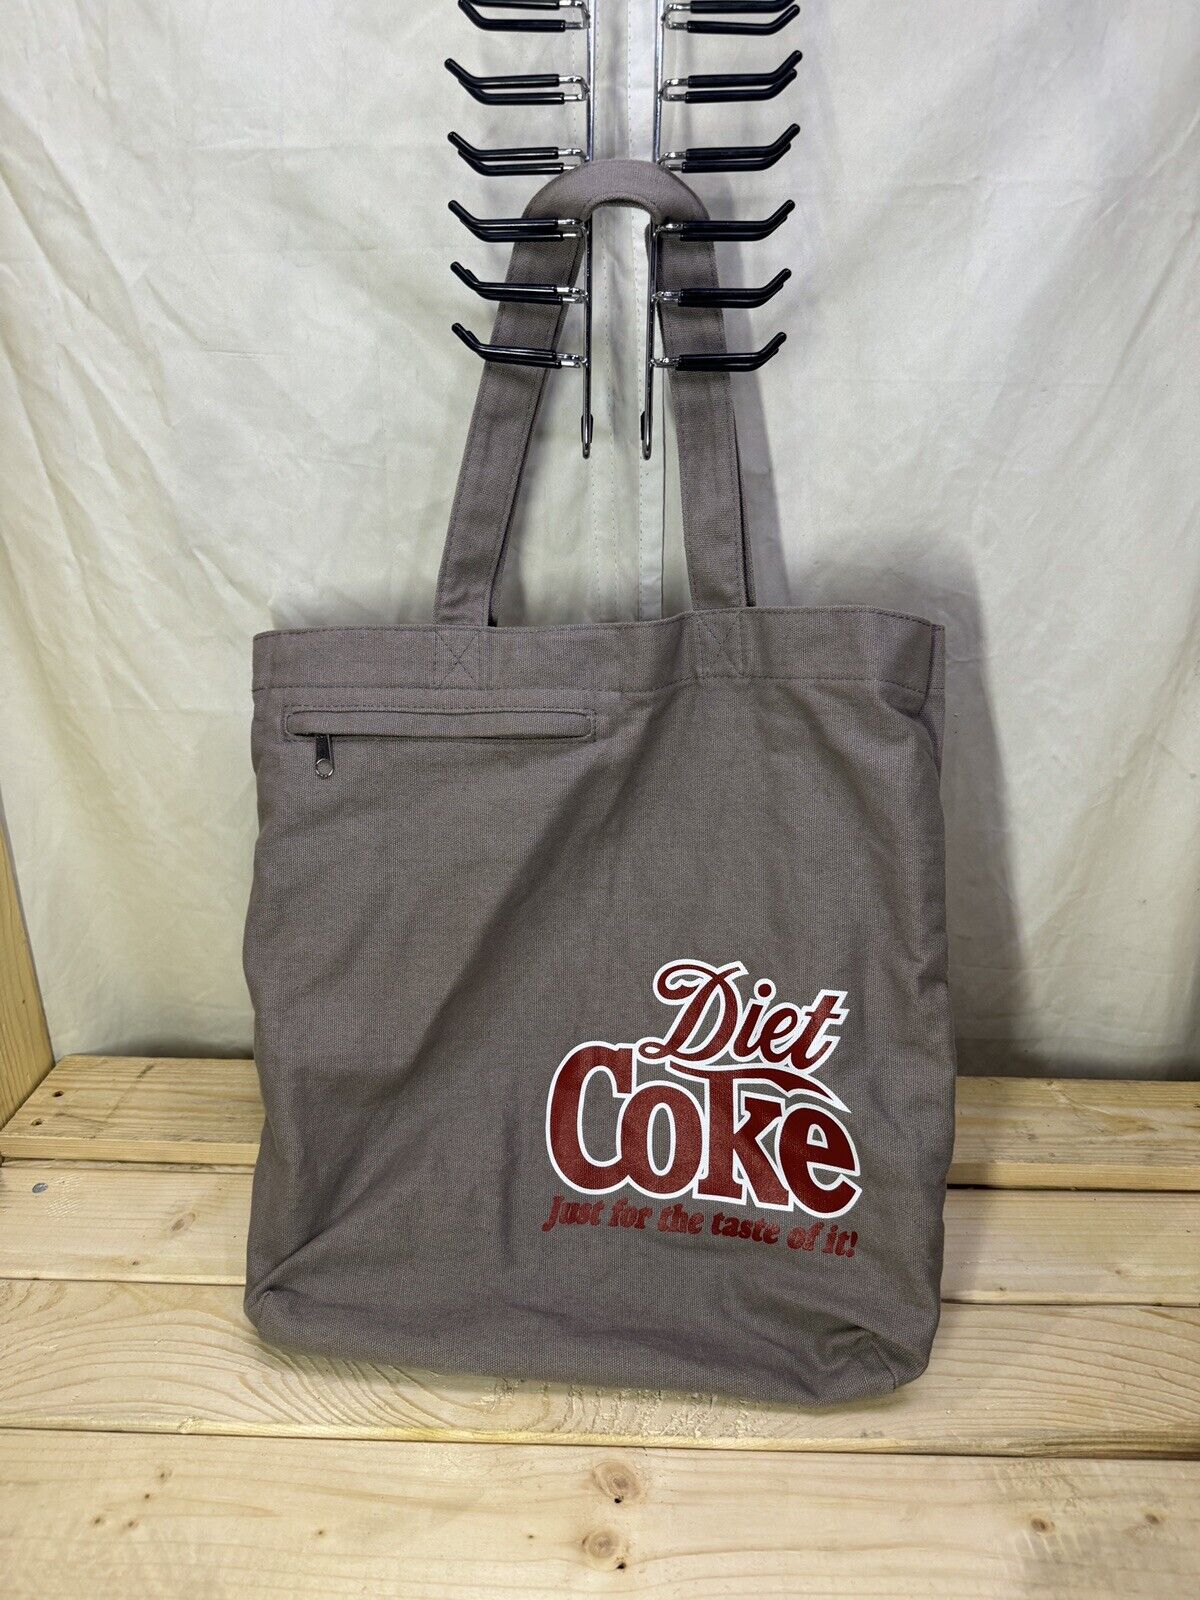 Diet Coke Canvas Bag Gray “Just for the Taste of it.” EUC